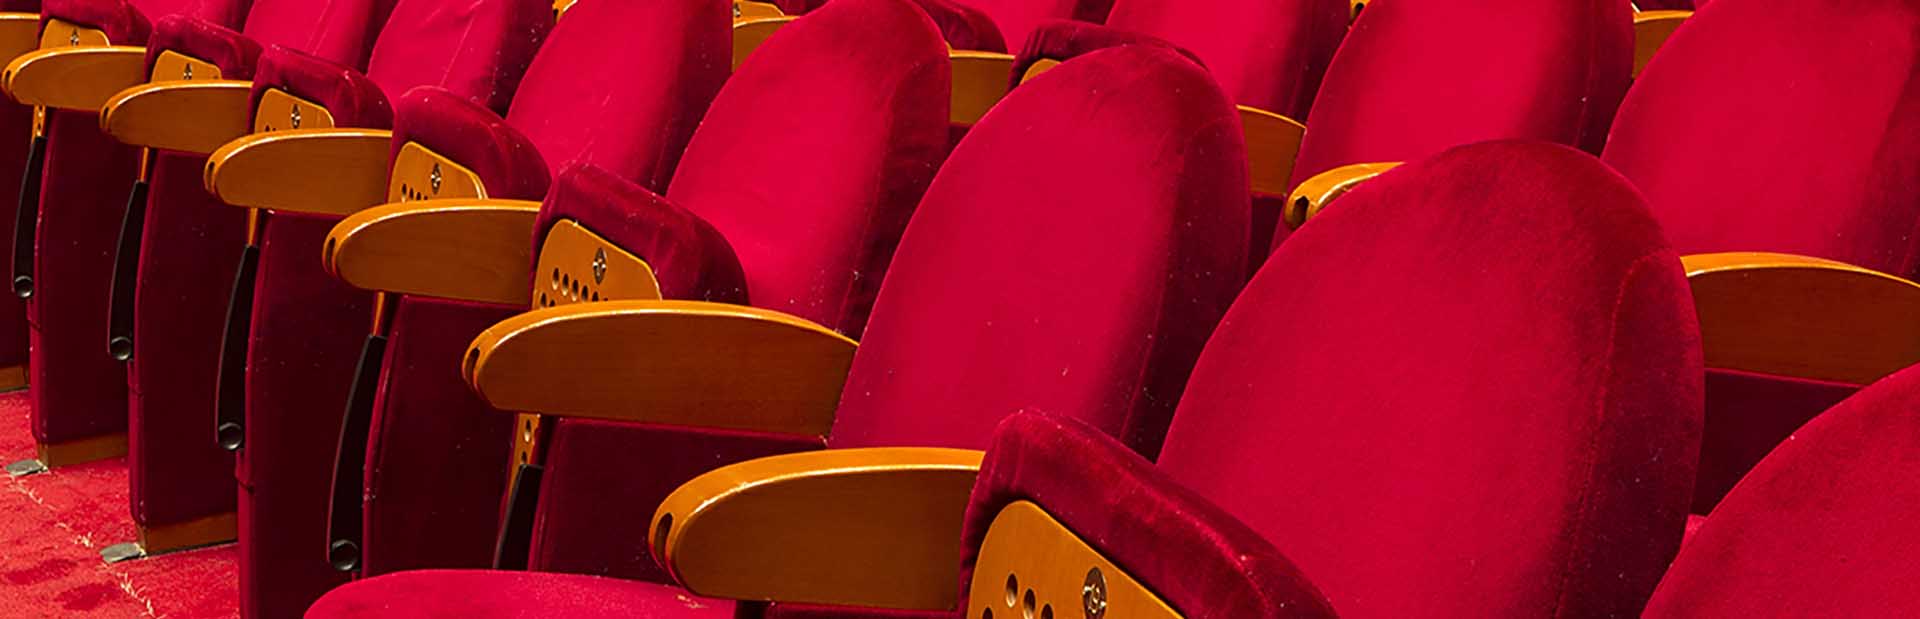 Red chairs in an empty theater